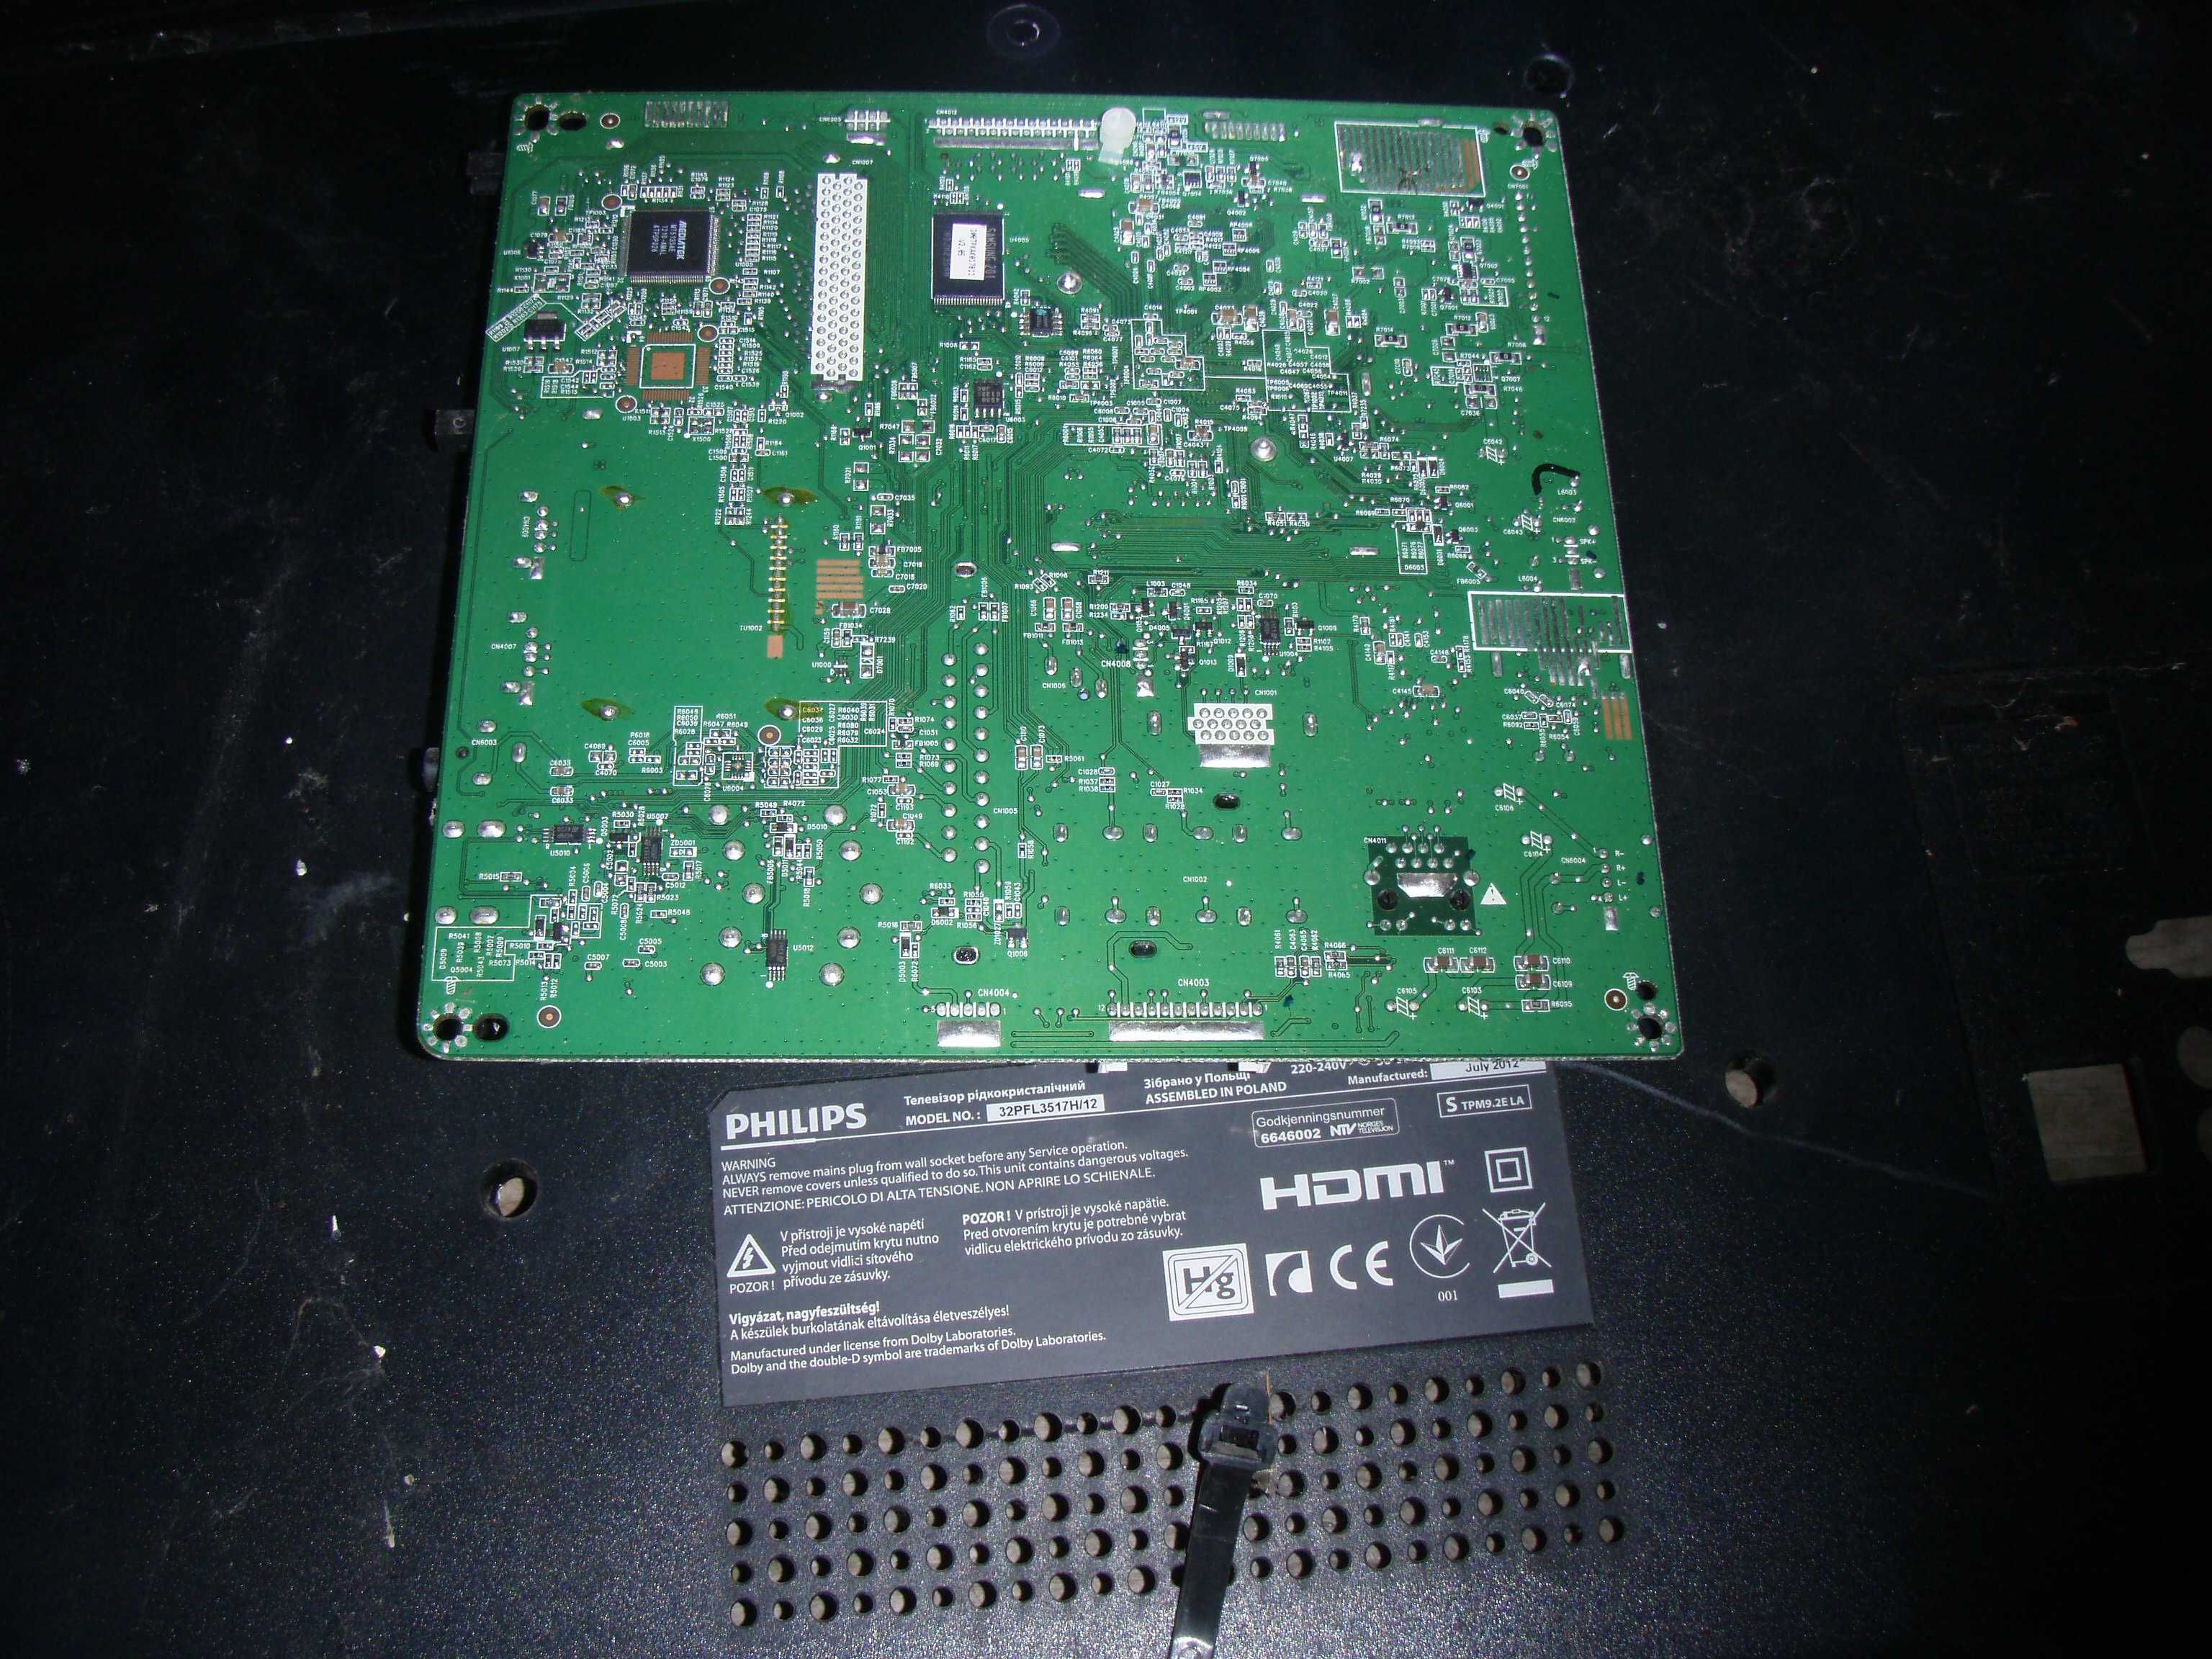 Ambitious thin accessories Pb 715G5155-M01-003-005K 715G5194-P01-W20-002S Philips 32PFL3517H/12  Cocorastii Grind • OLX.ro